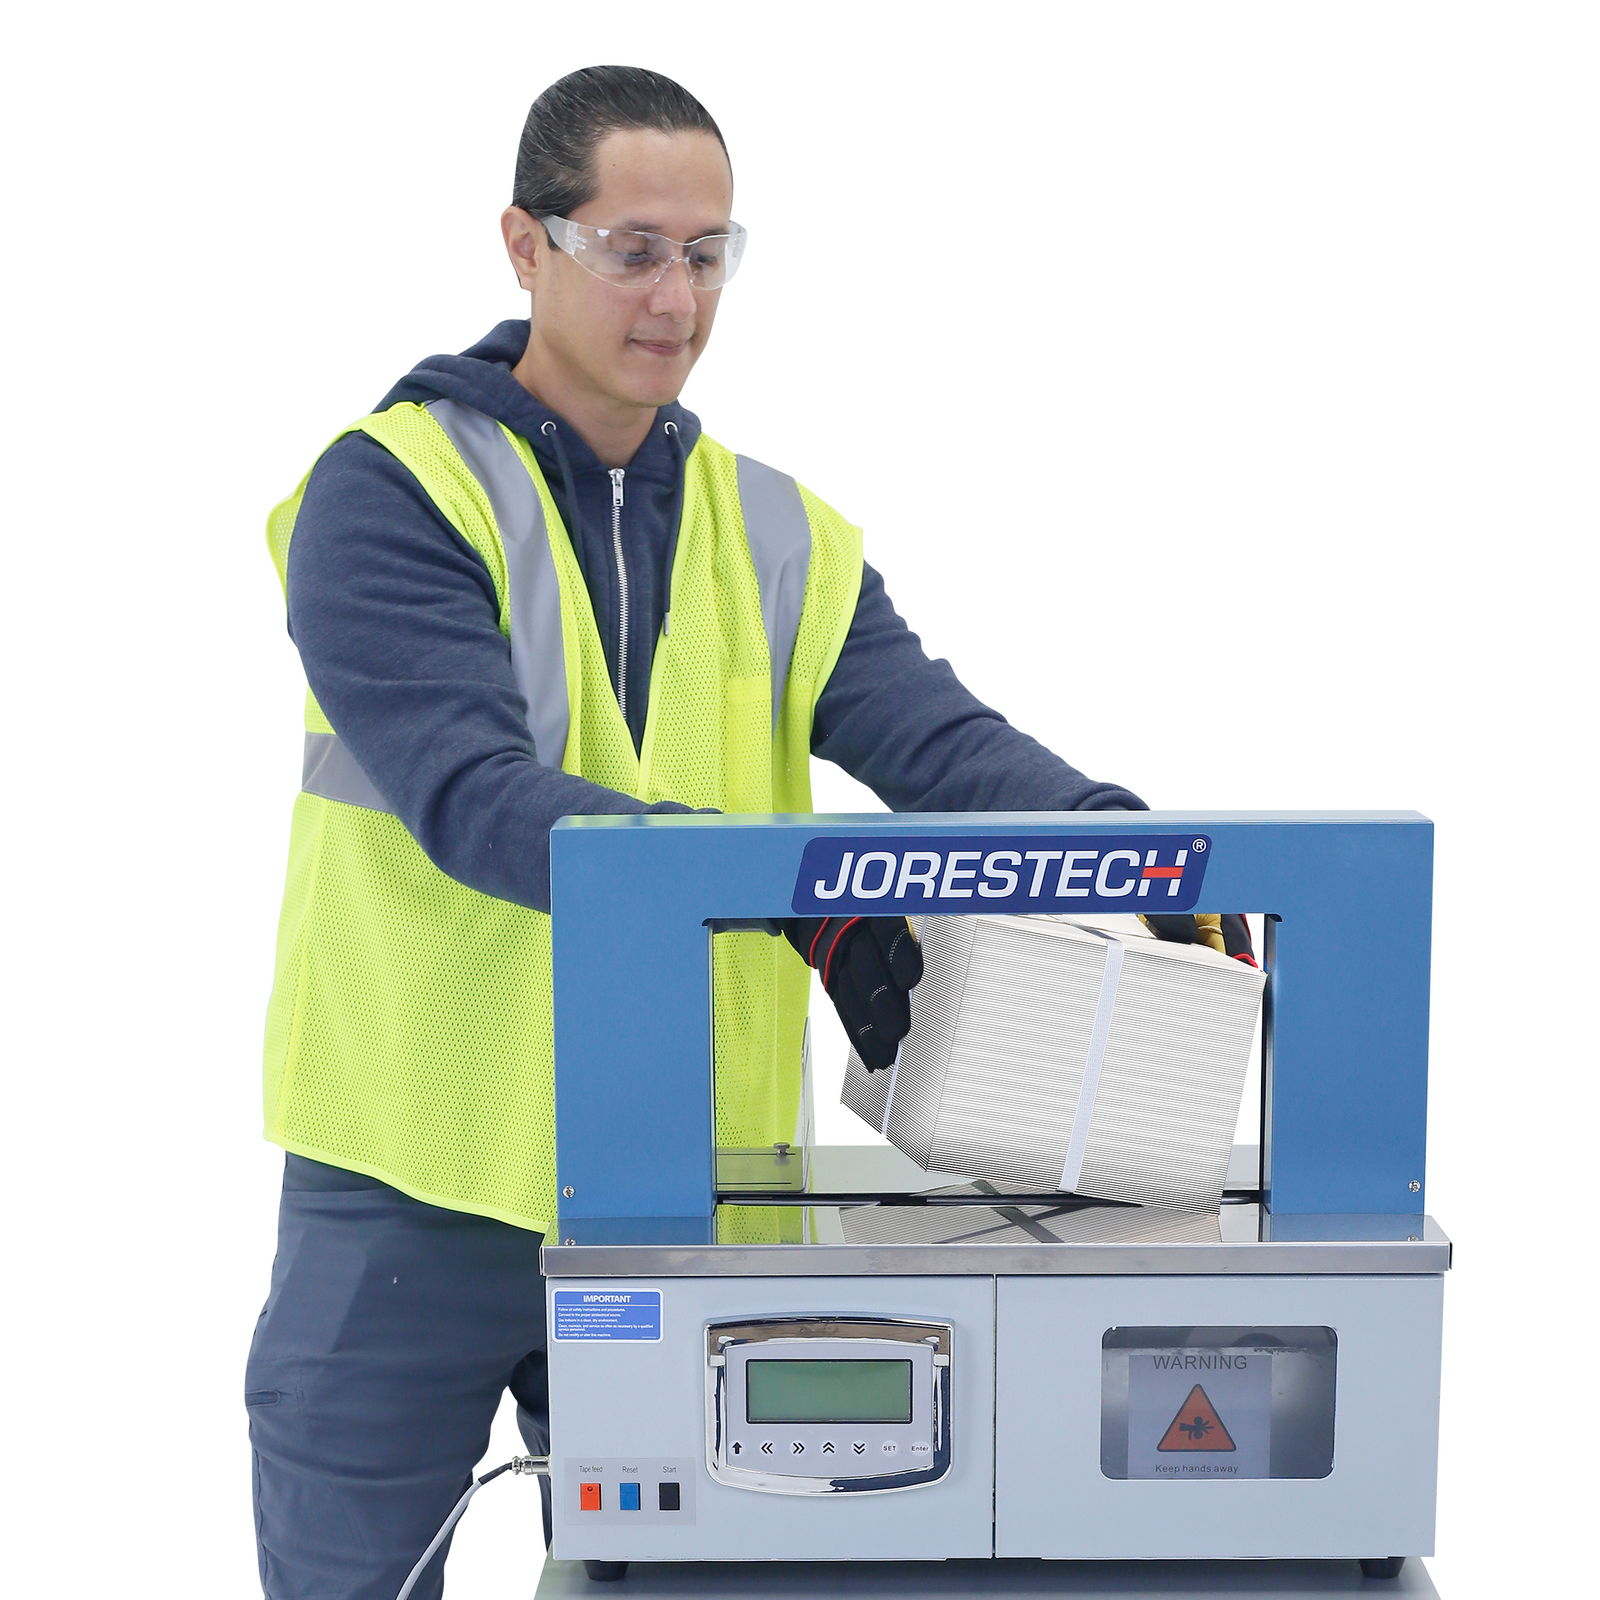 Man wearing a navy blue jacket and pants with a high-visibility yellow vest on top. He is using the JORES TECHNOLOGIES®  Paper banding system to apply and secure a band around a textured box.